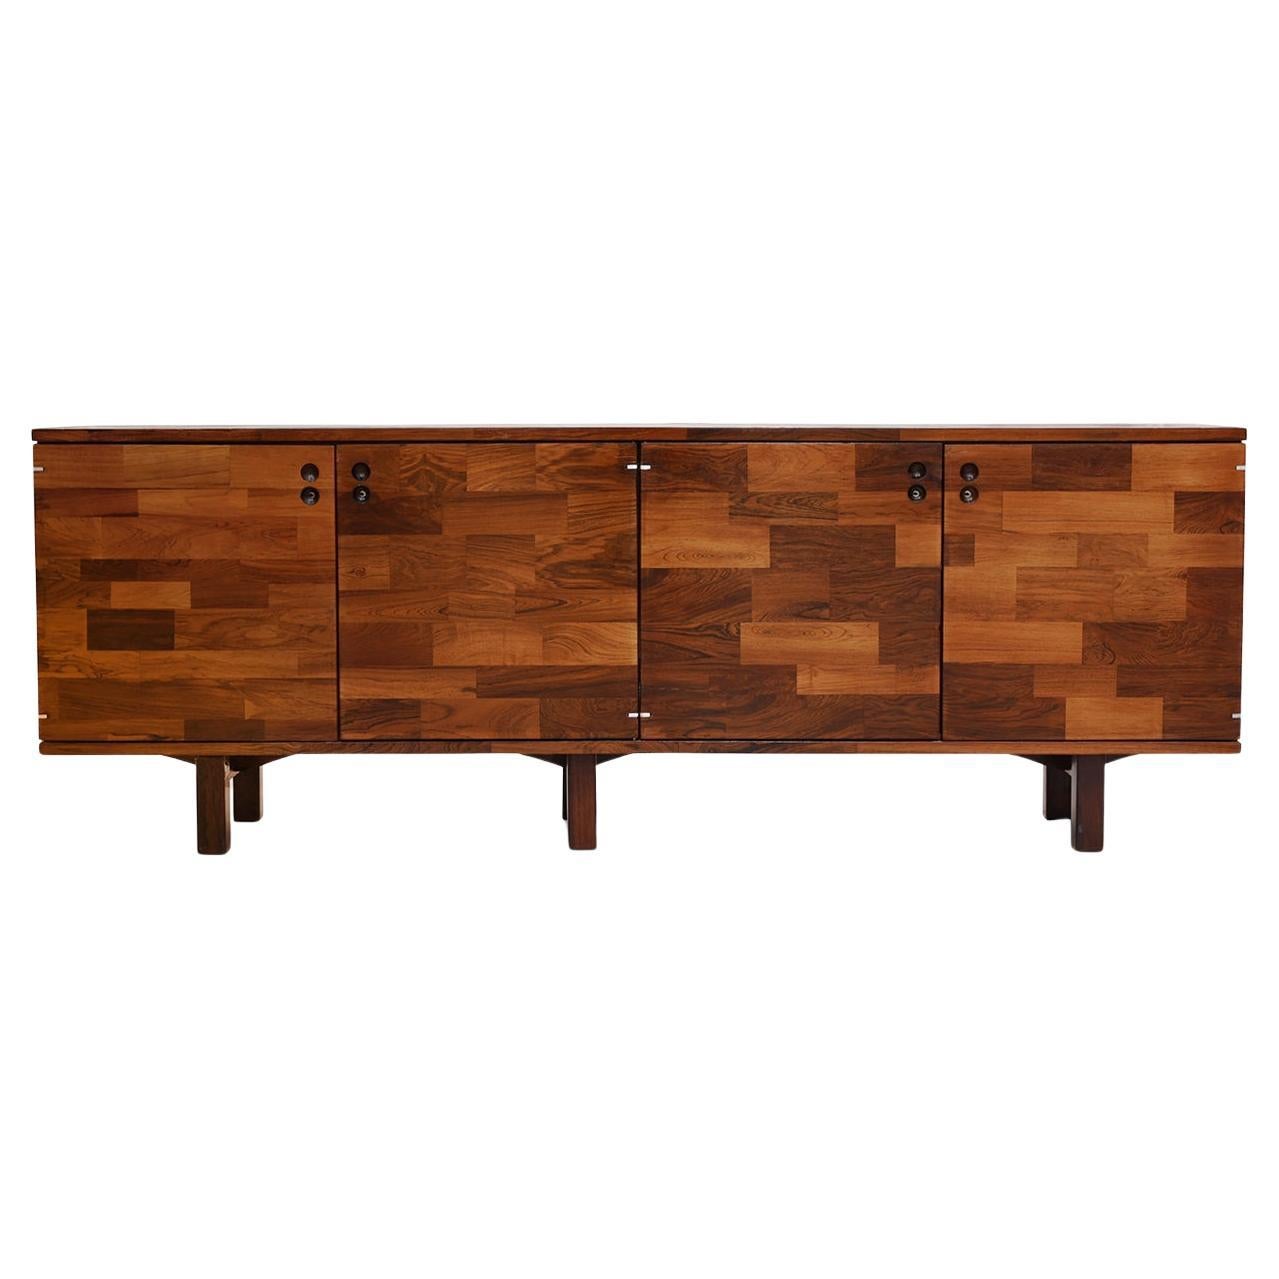 Credenza in Hardwood Patchwork style by Jorge Zalszupin, 1960’s For Sale